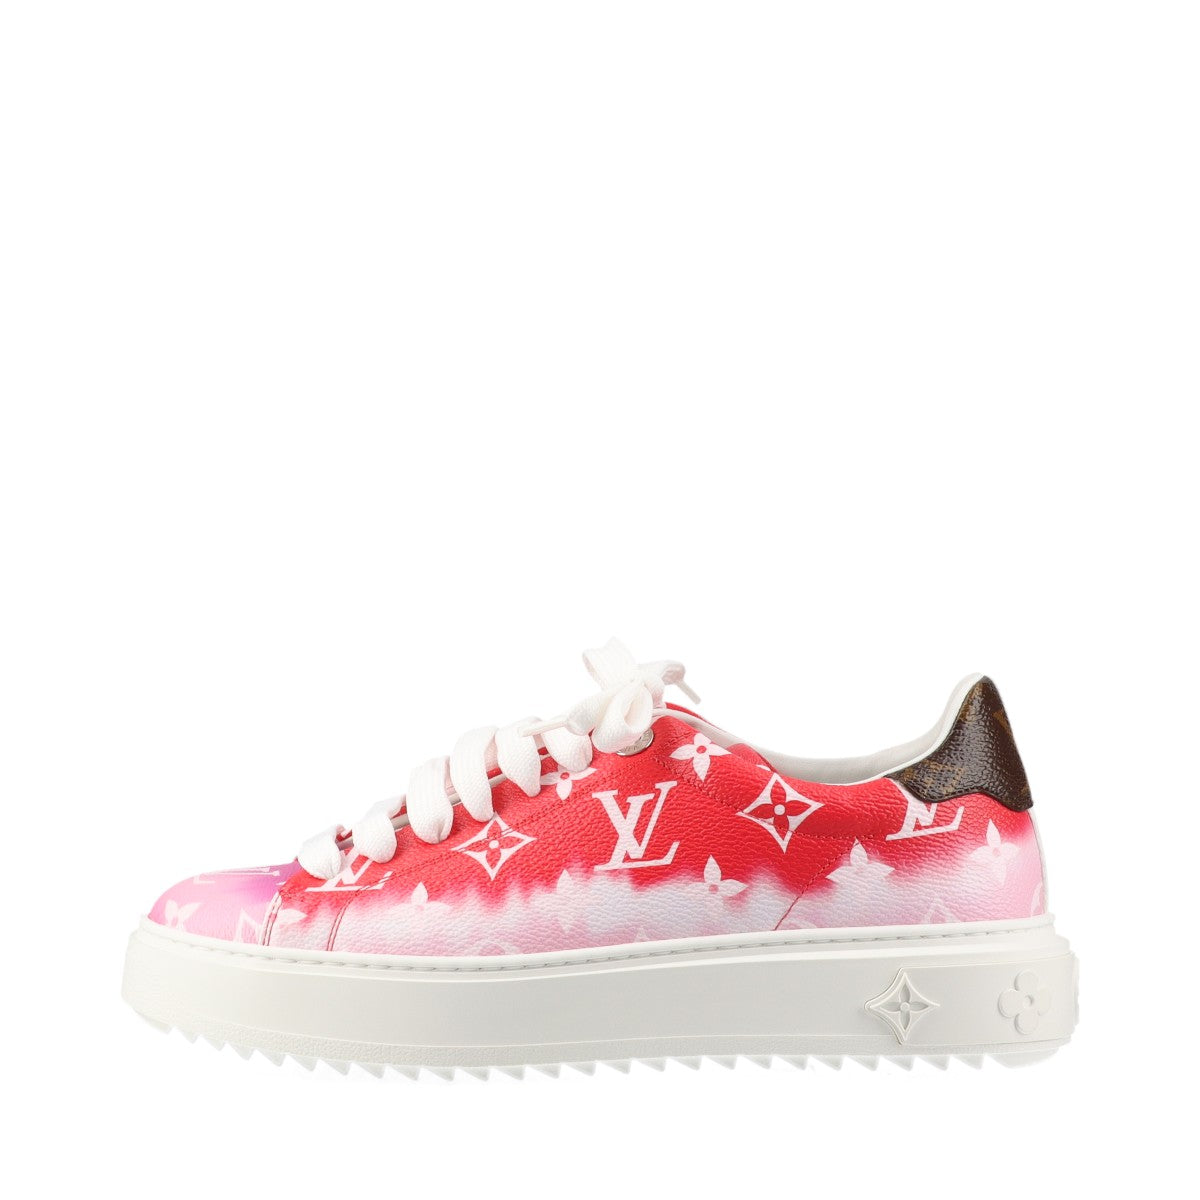 Louis Vuitton Timeout line 19-year PVC & leather Sneakers 36.5 Ladies' Red x white CL1129 Monogram